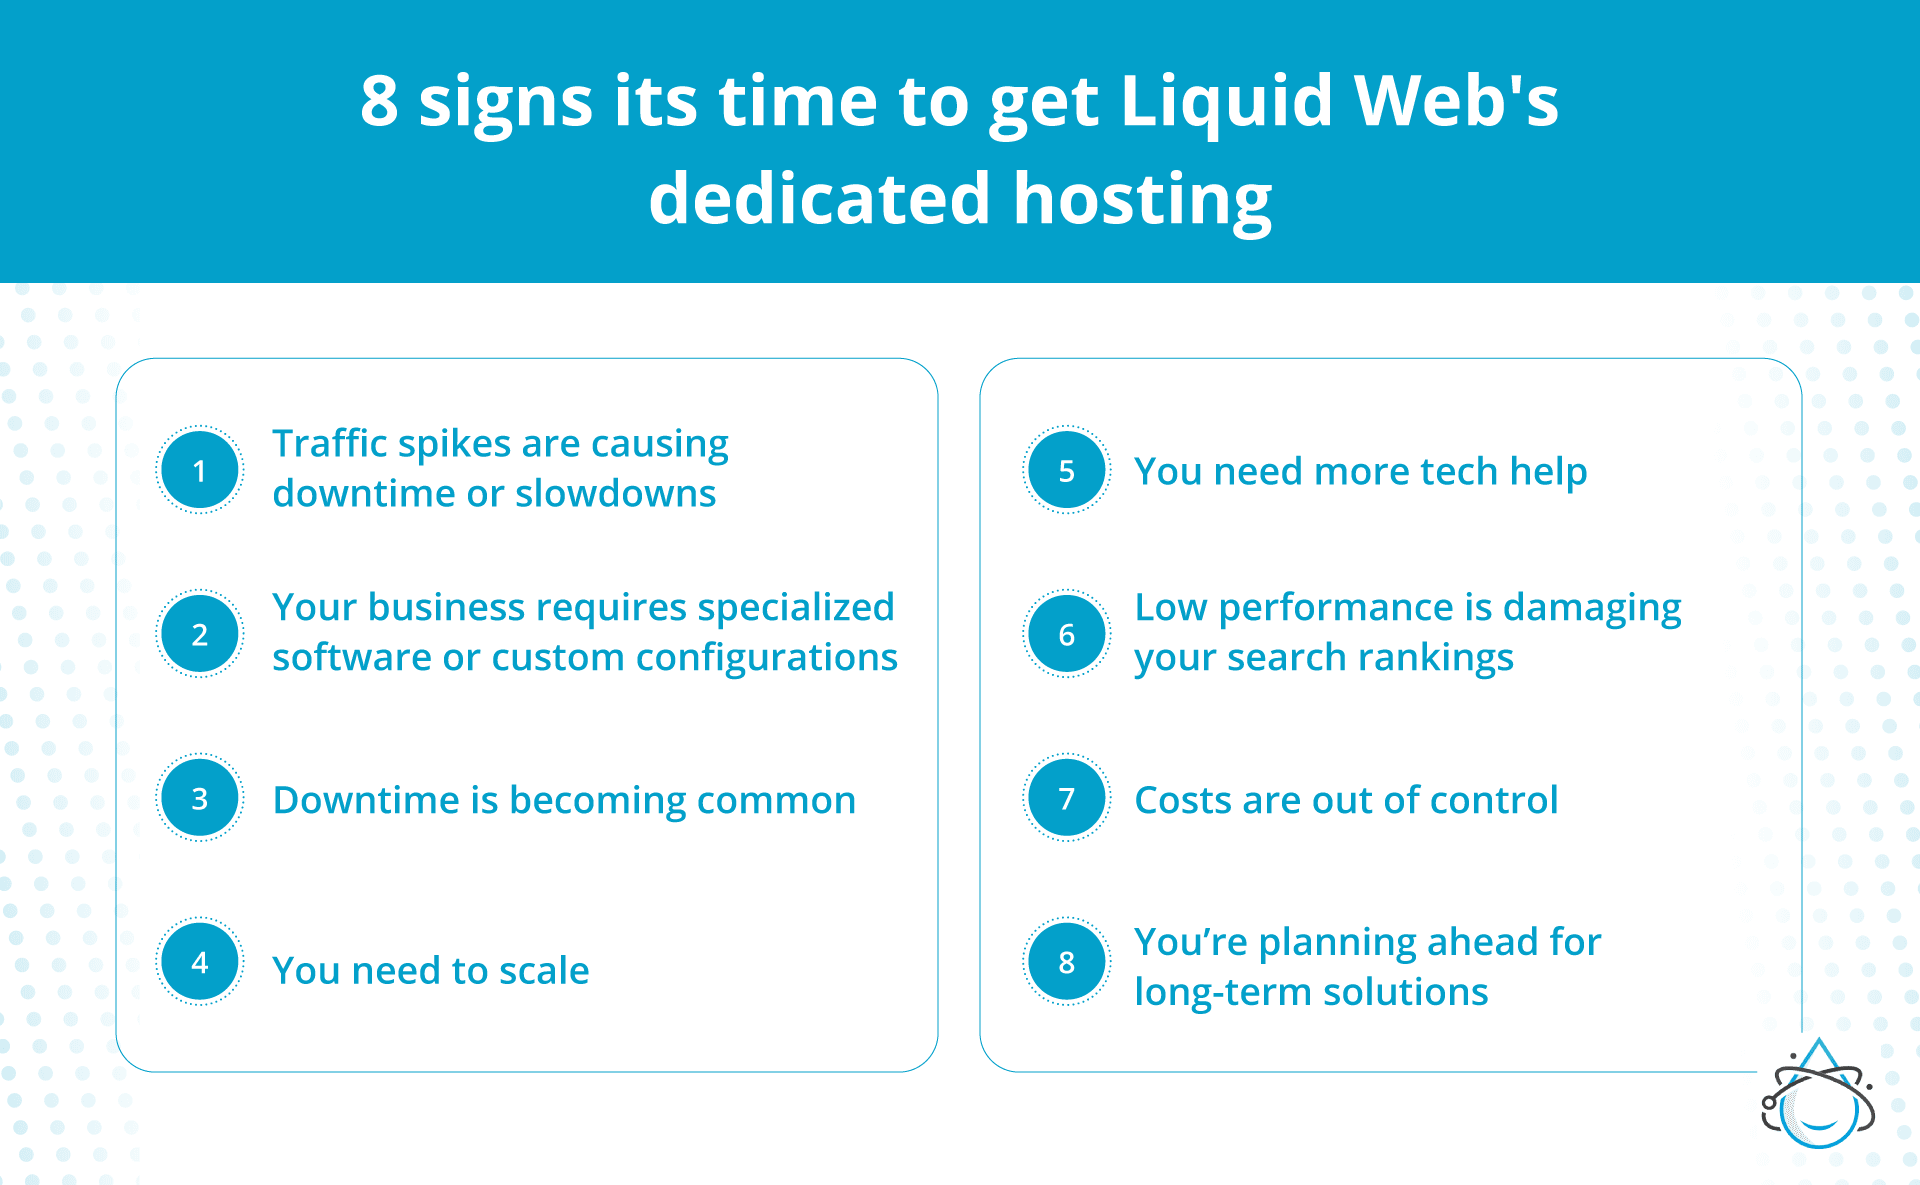 The eight signs it’s time to get Liquid Web’s dedicated hosting.